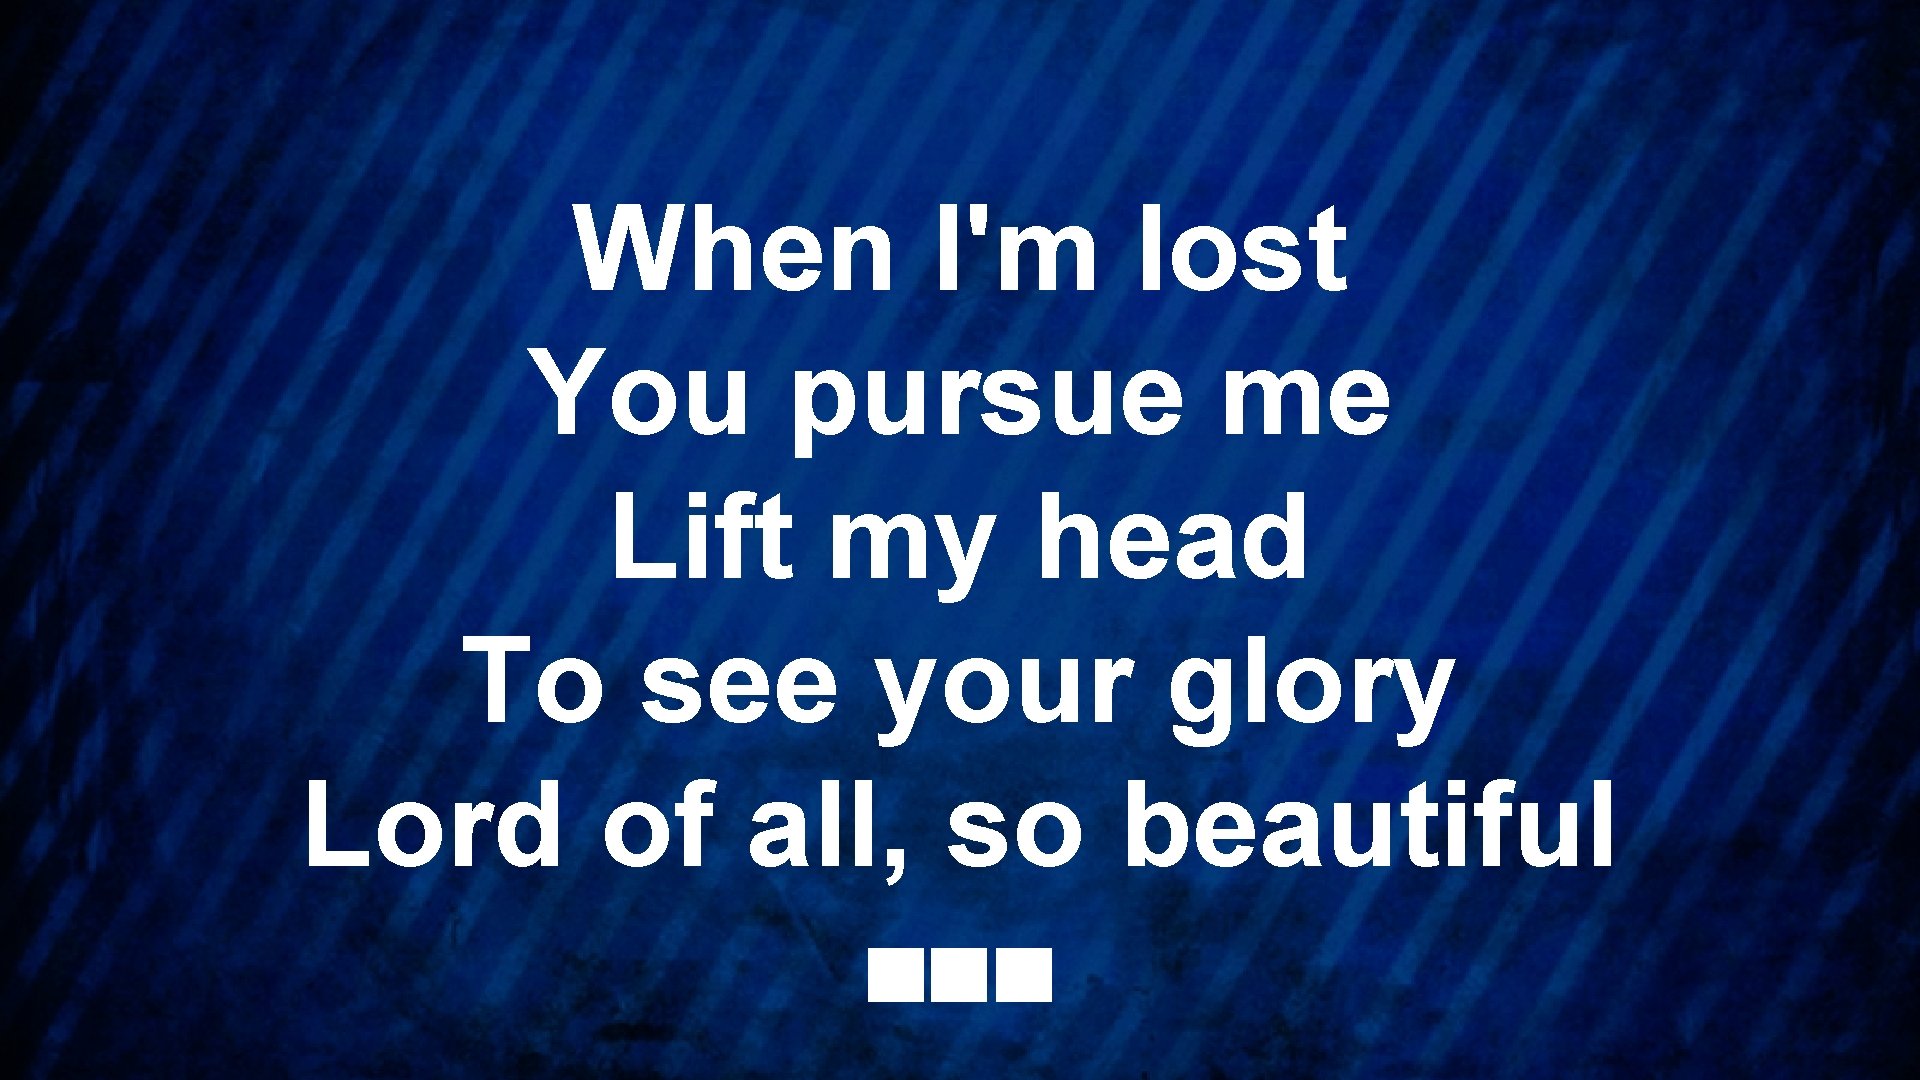 When I'm lost You pursue me Lift my head To see your glory Lord